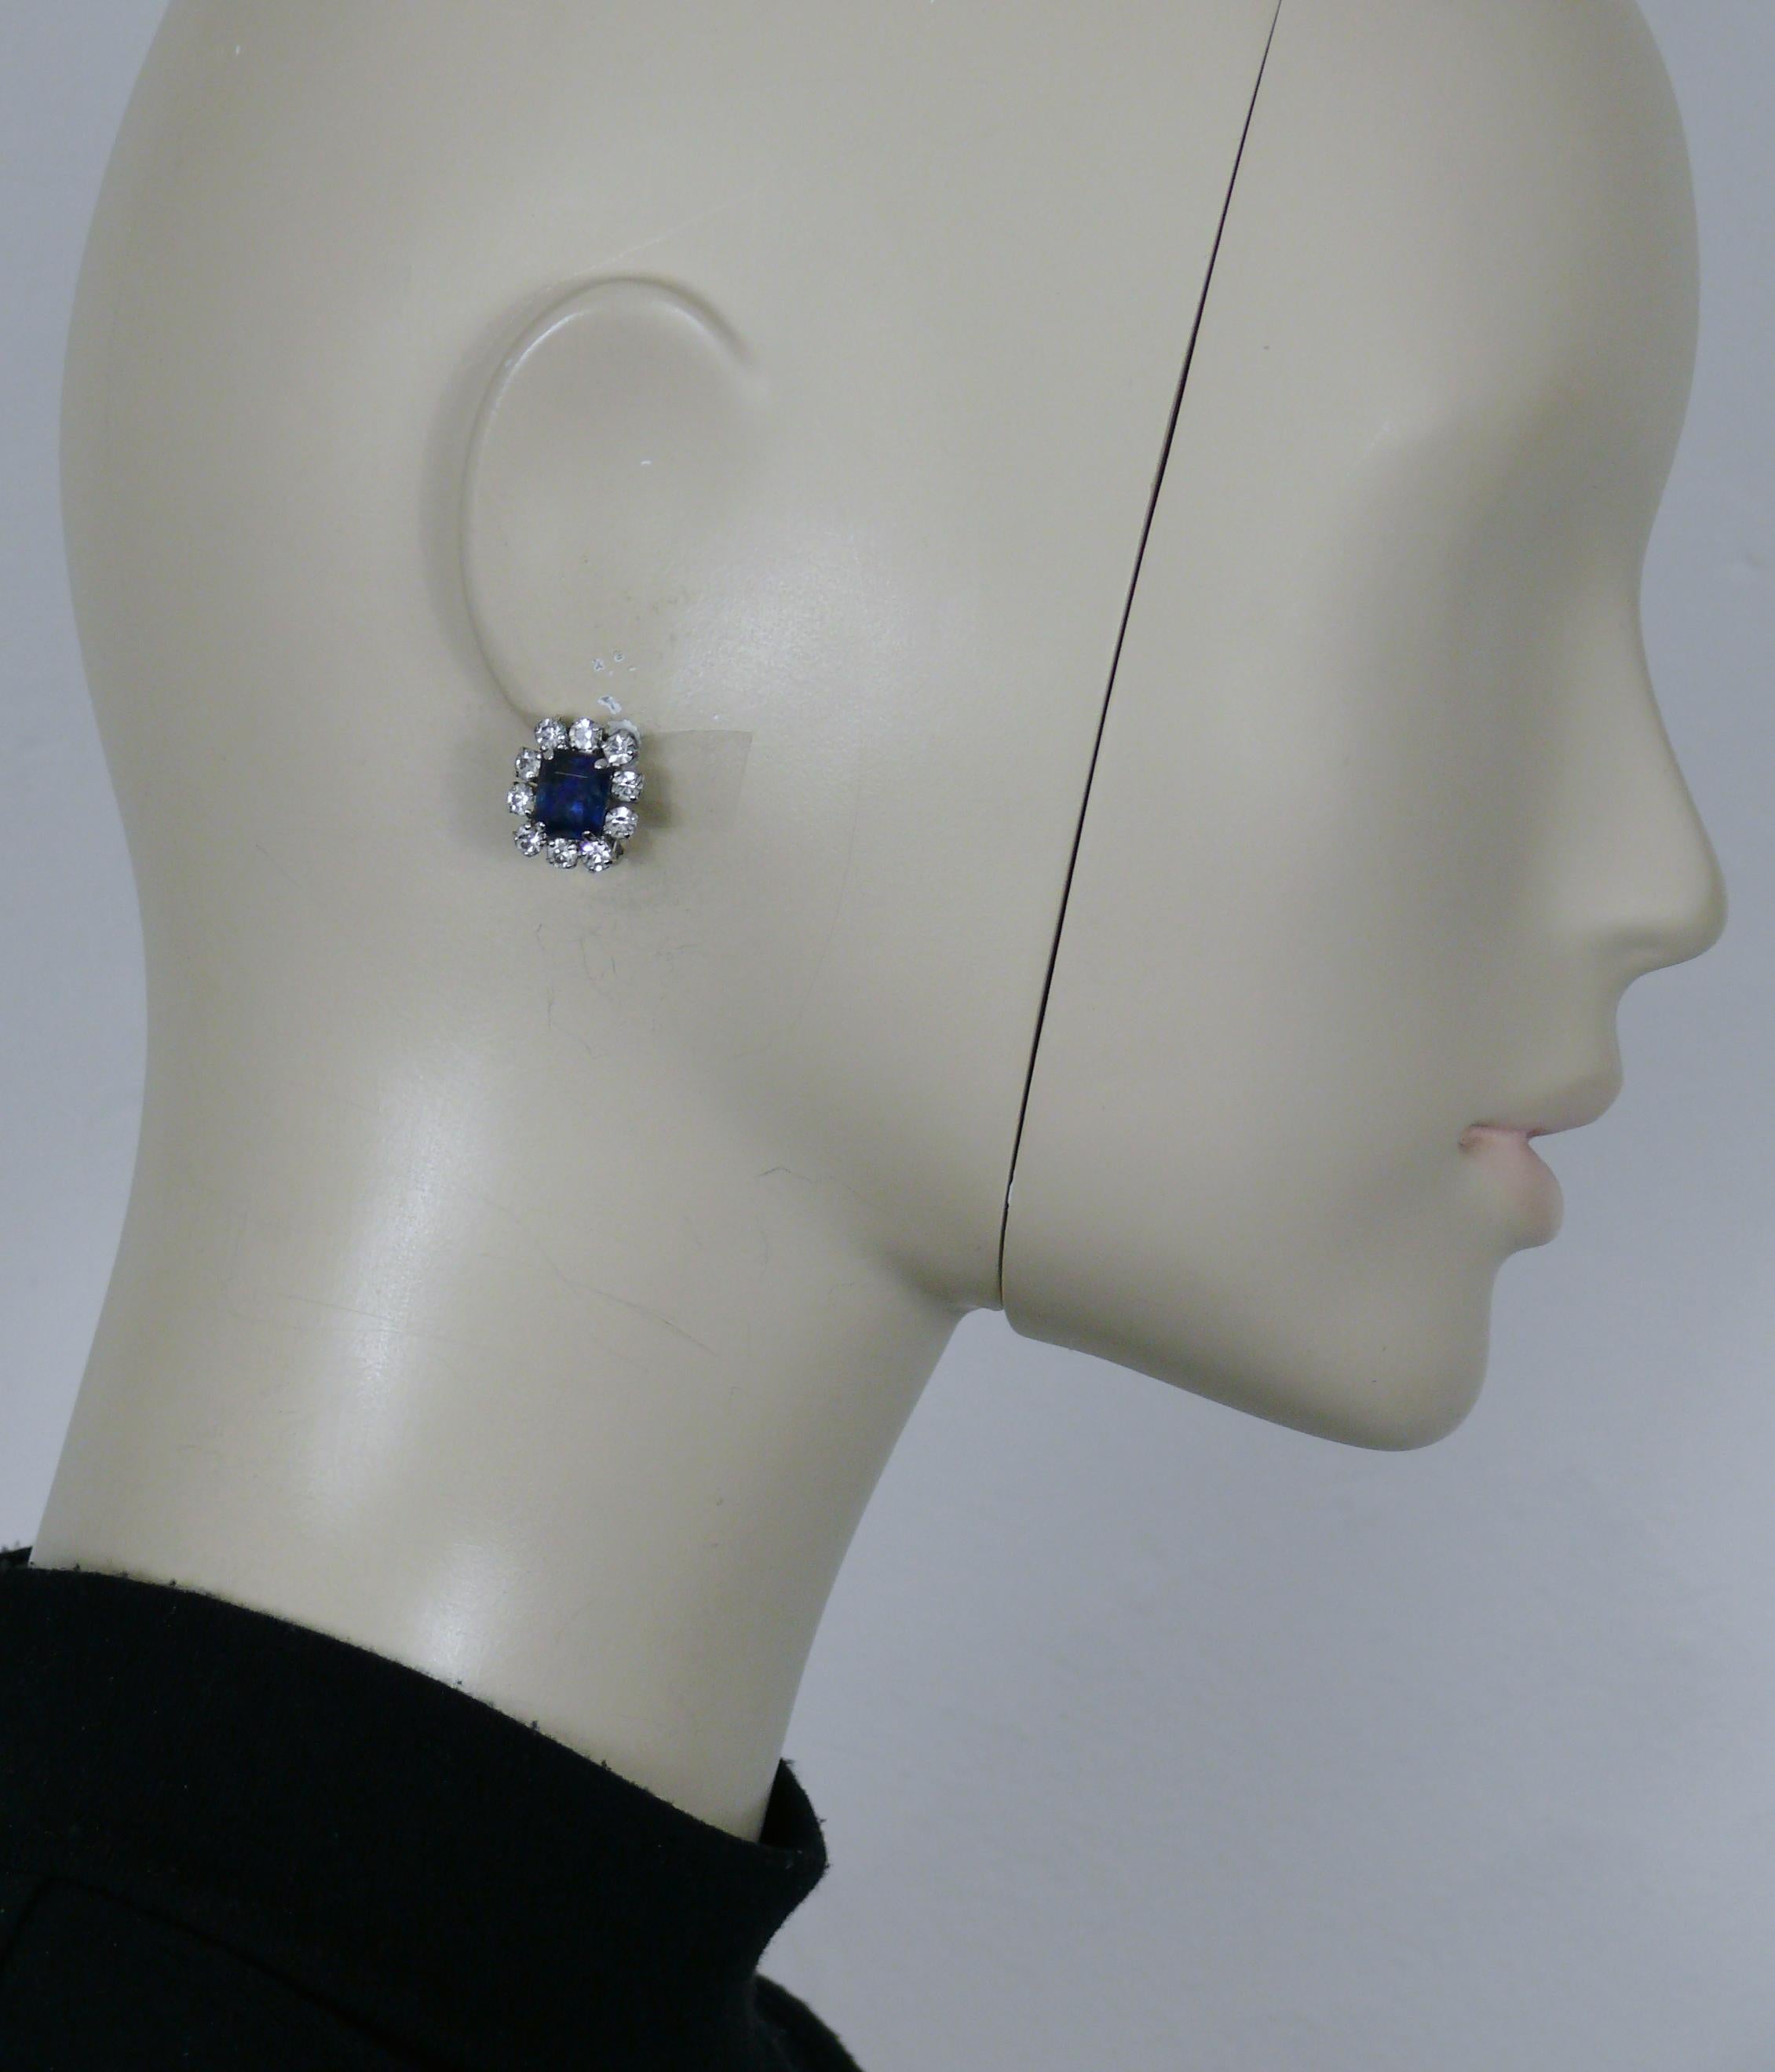 CHRISTIAN DIOR vintage silver tone clip-on earrings featuring a rectangular sapphire colour glass cabochon adorned with clear crystals.

Embossed 1970 CHR. DIOR Germany.

Indicative measurements : height approx. 1.4 cm (0.55 inch) / max width